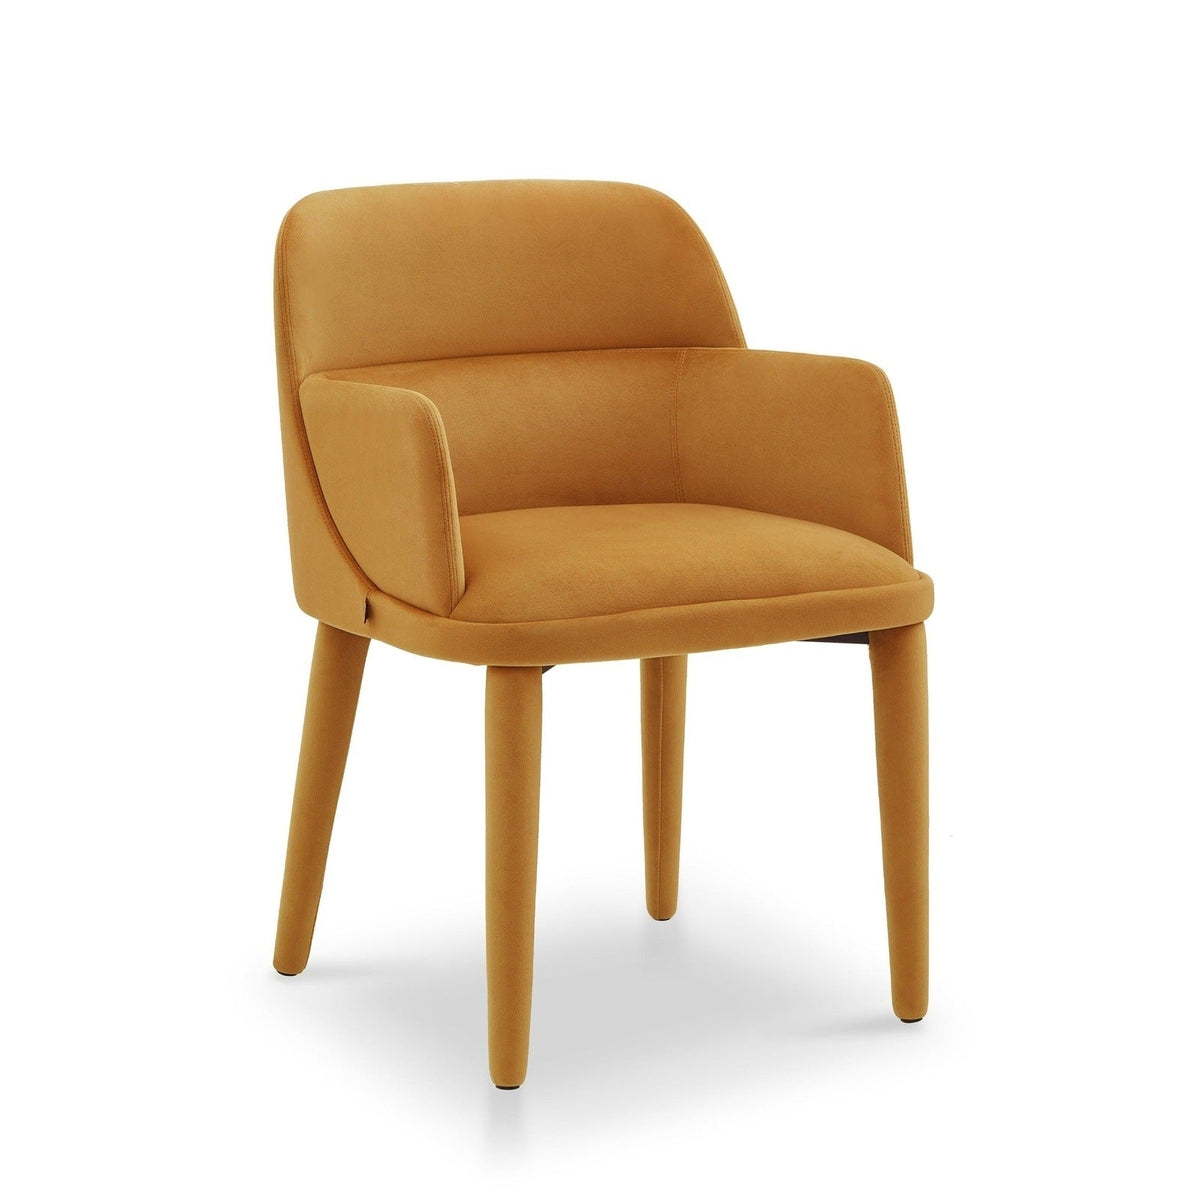 Liang Eimil Diva Dining Chair With Arms In Kaster Ii Mustard